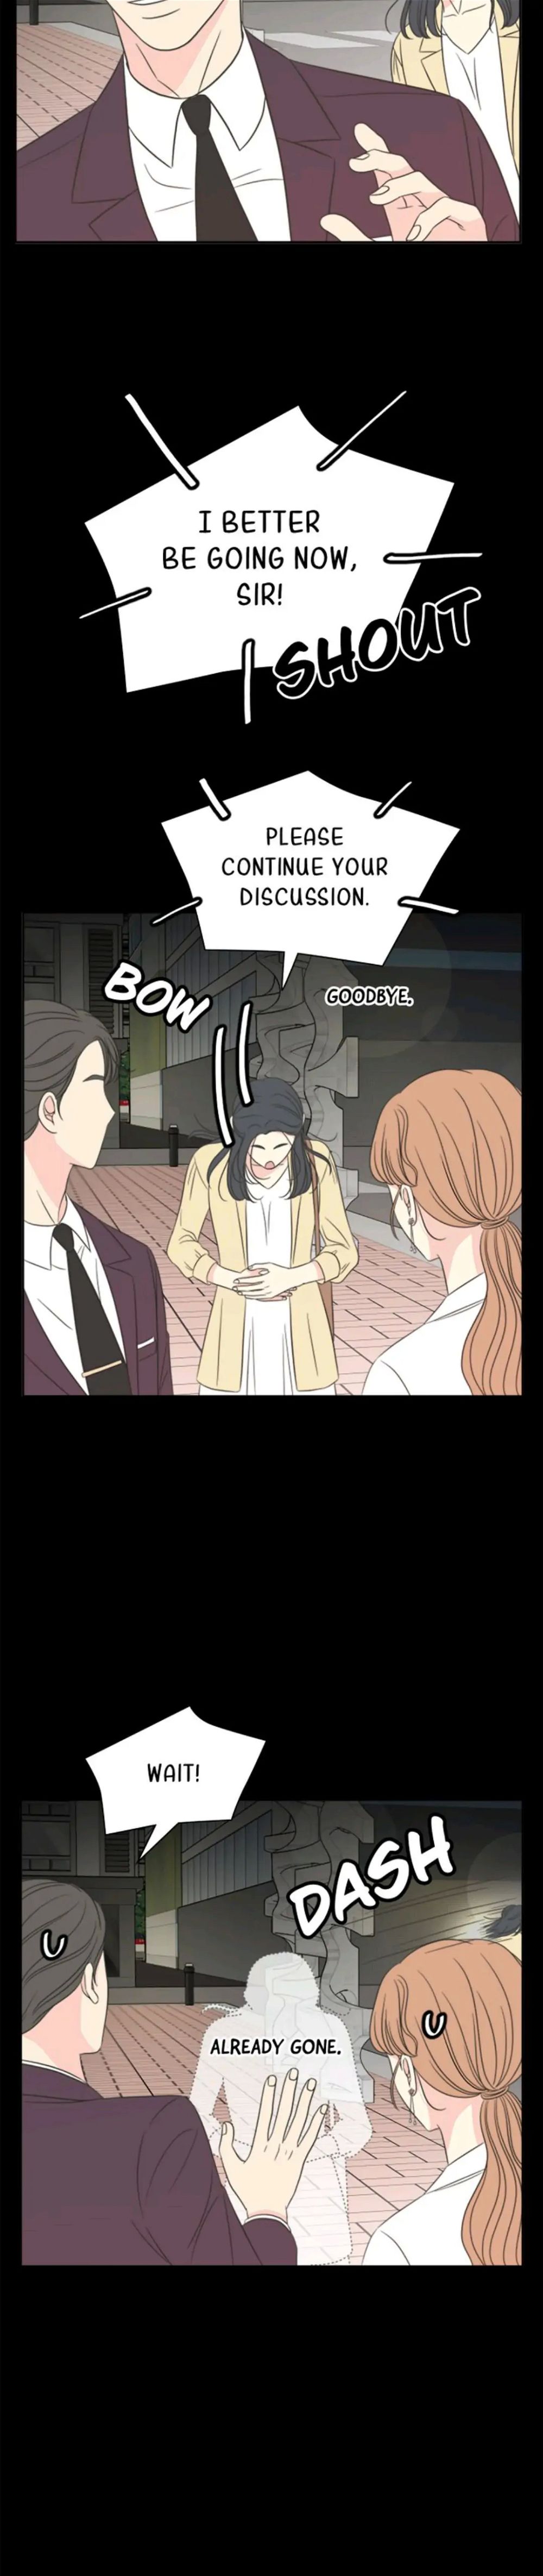 Check In to My Heart chapter 13 - Page 17